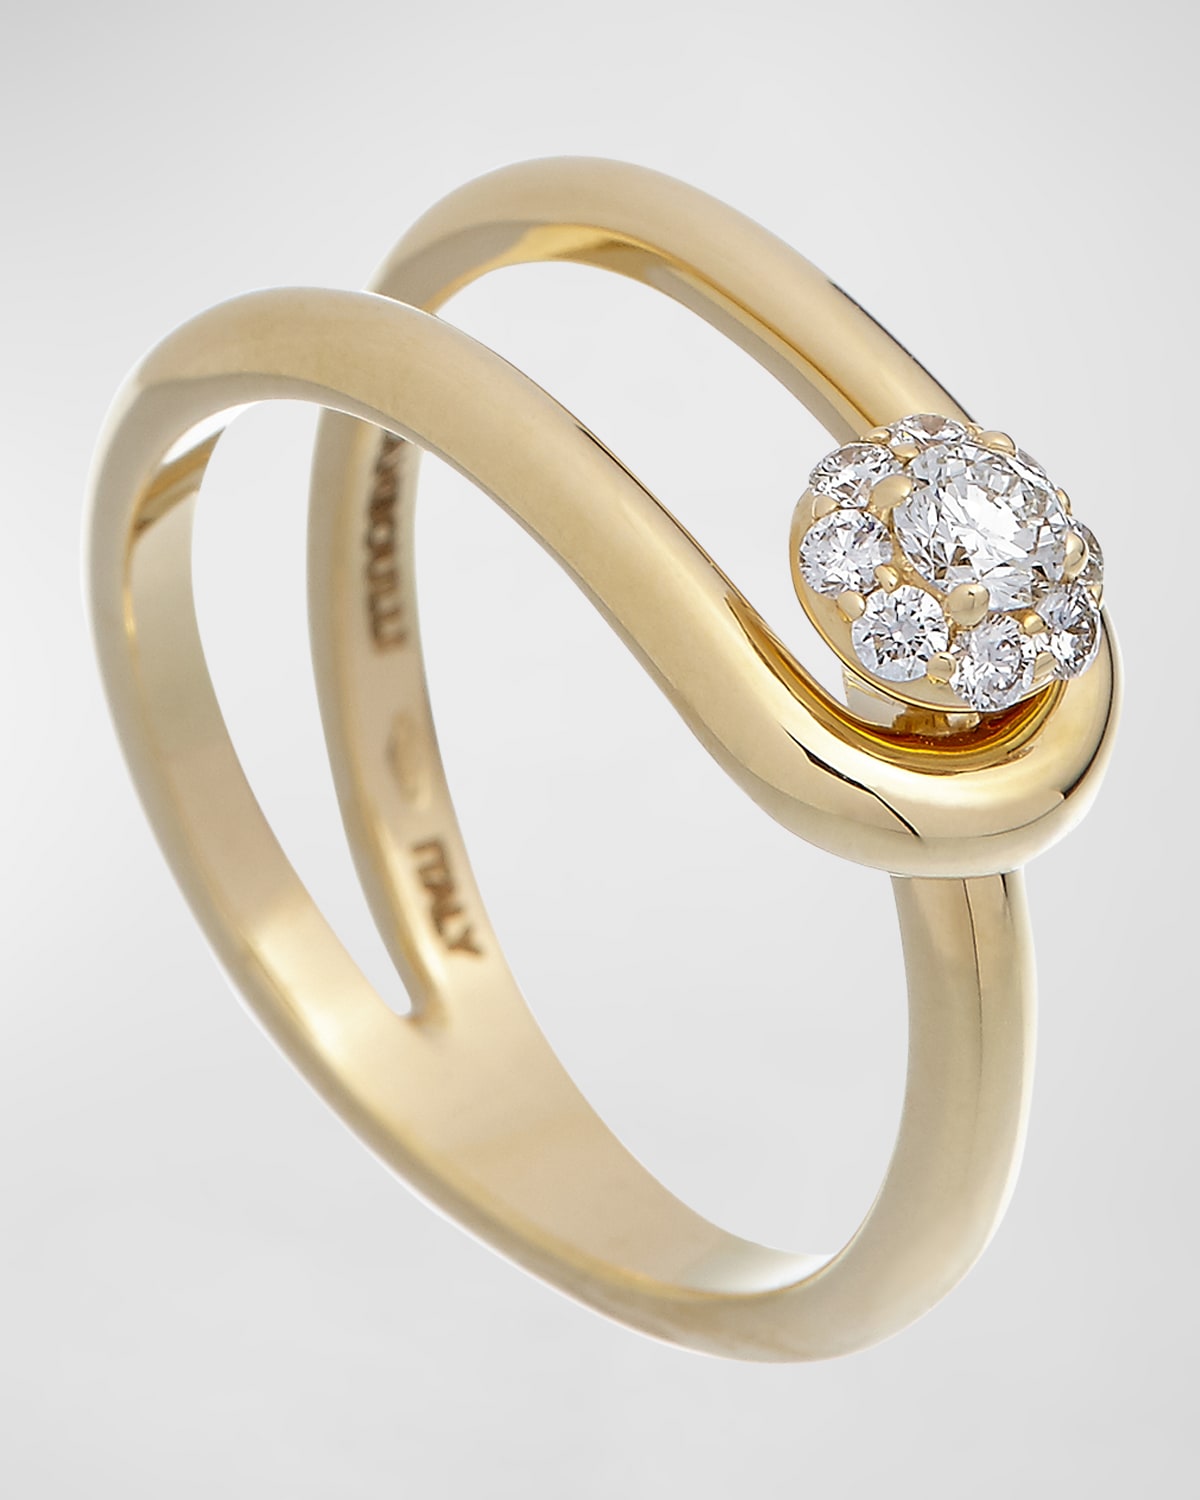 Krisonia 18k Yellow Gold Ring With Diamond And Halo